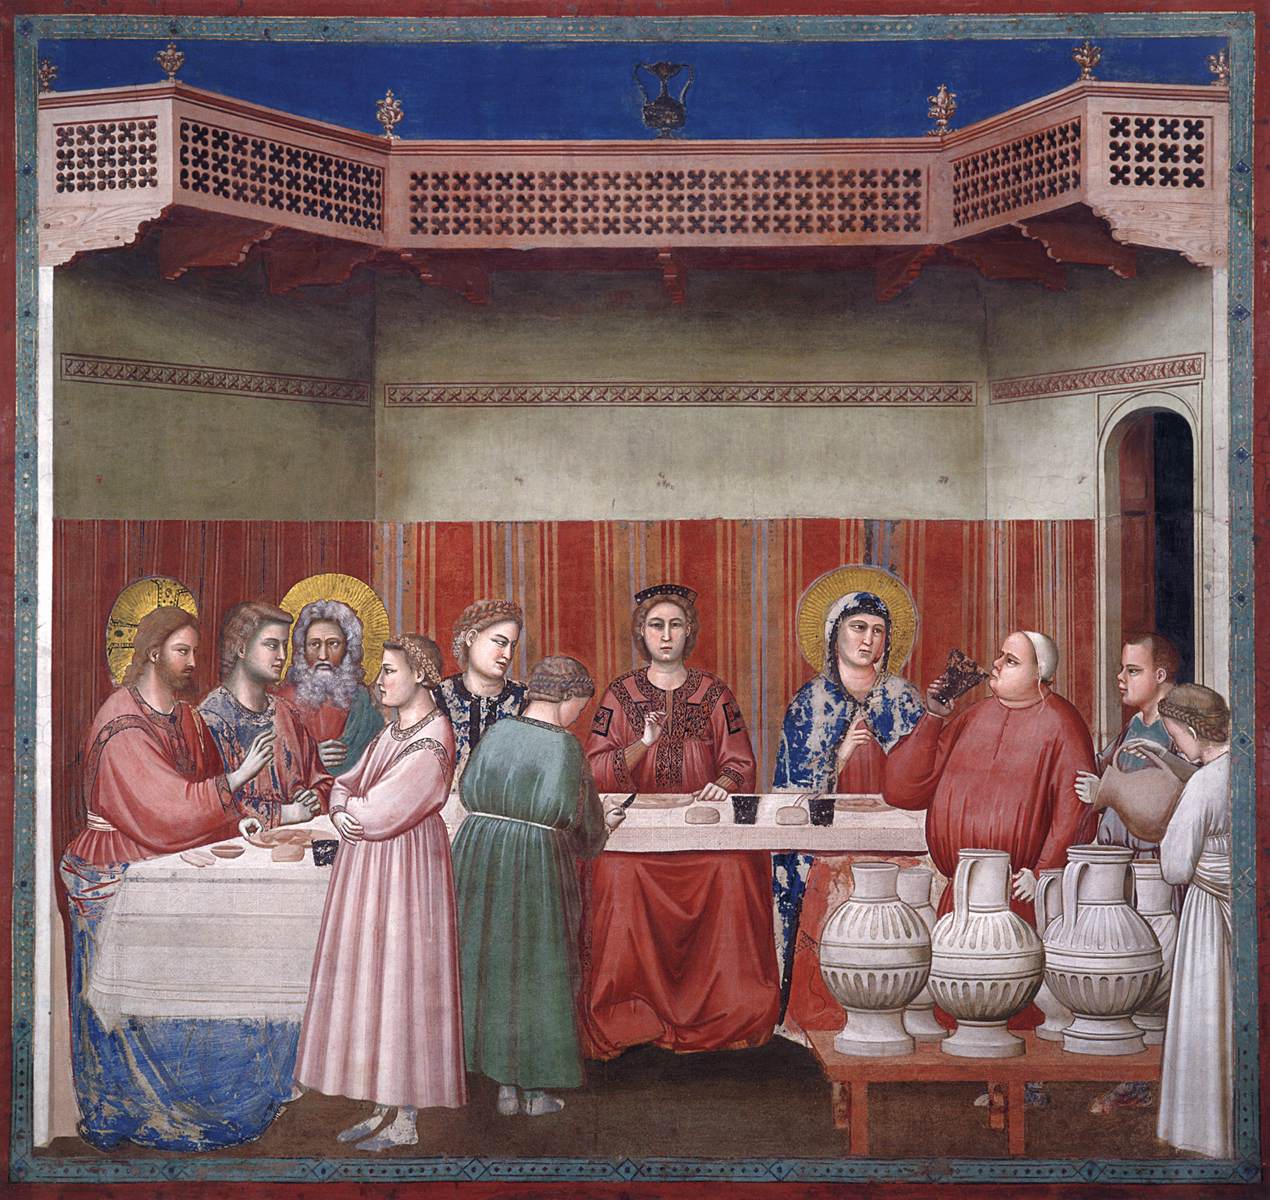 No 24 Scenes from the Life of Christ: 8 Marriage at Cana